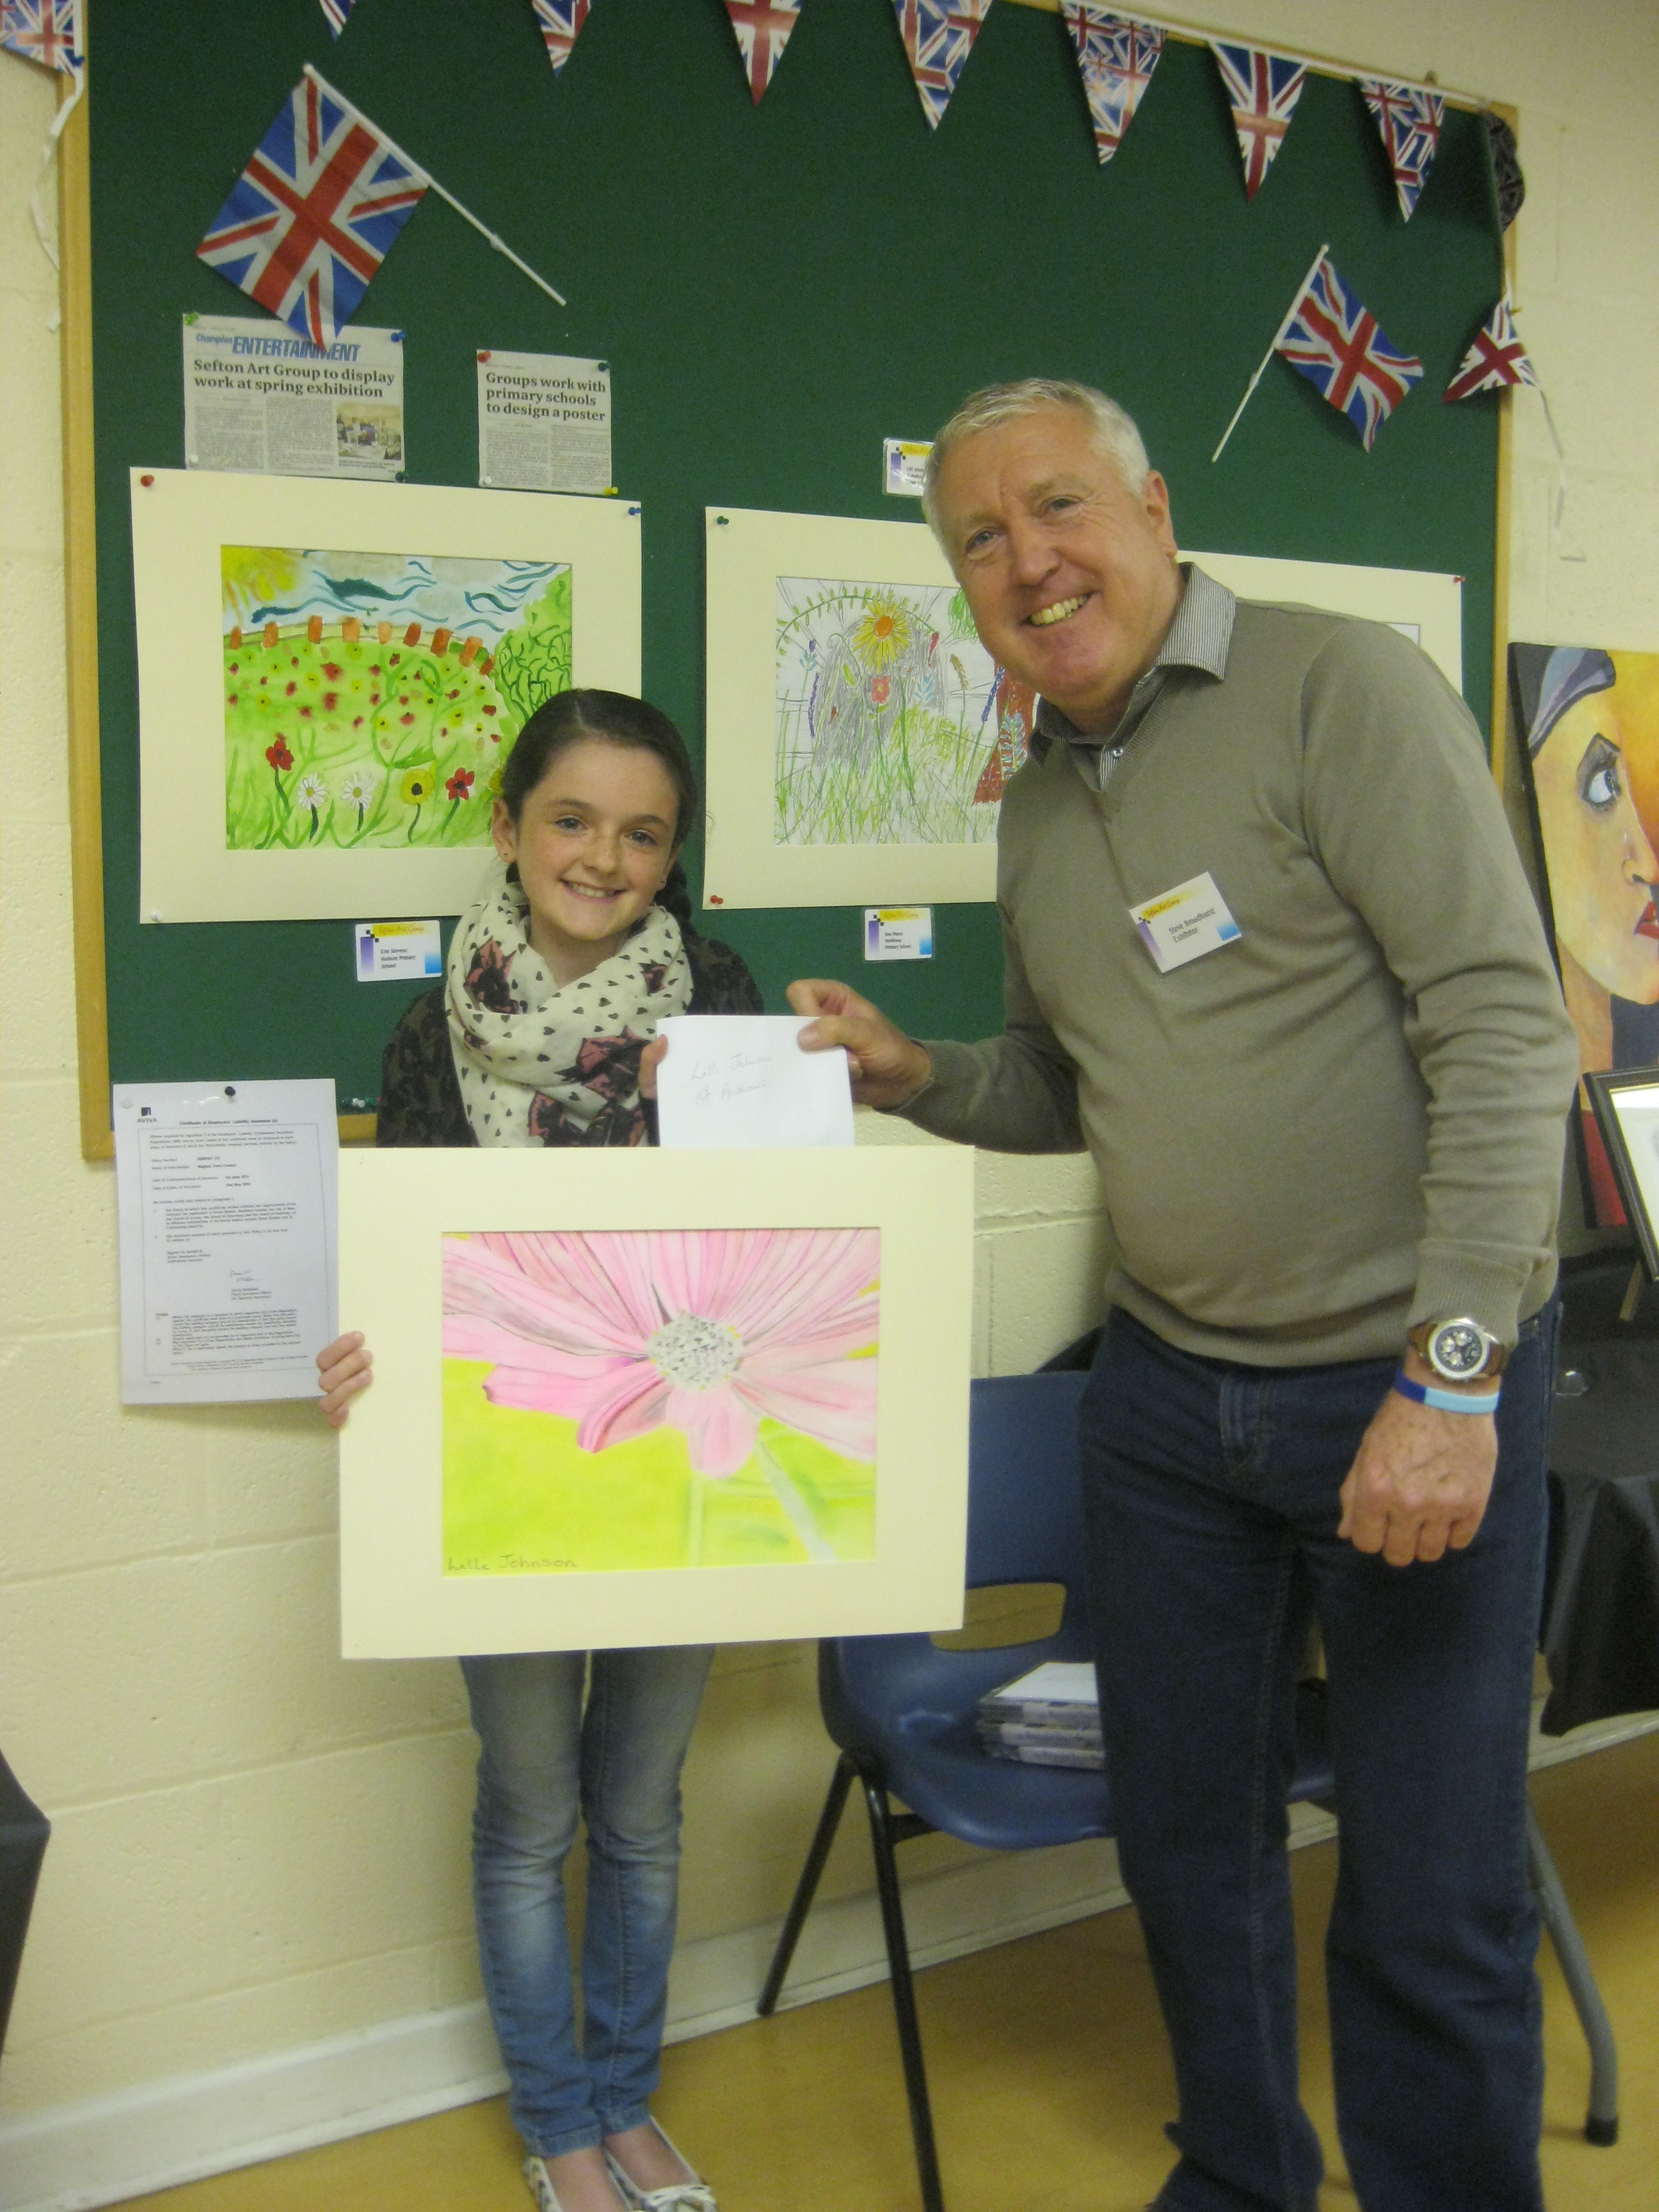 prize giving to local school pupil for her design for art poster